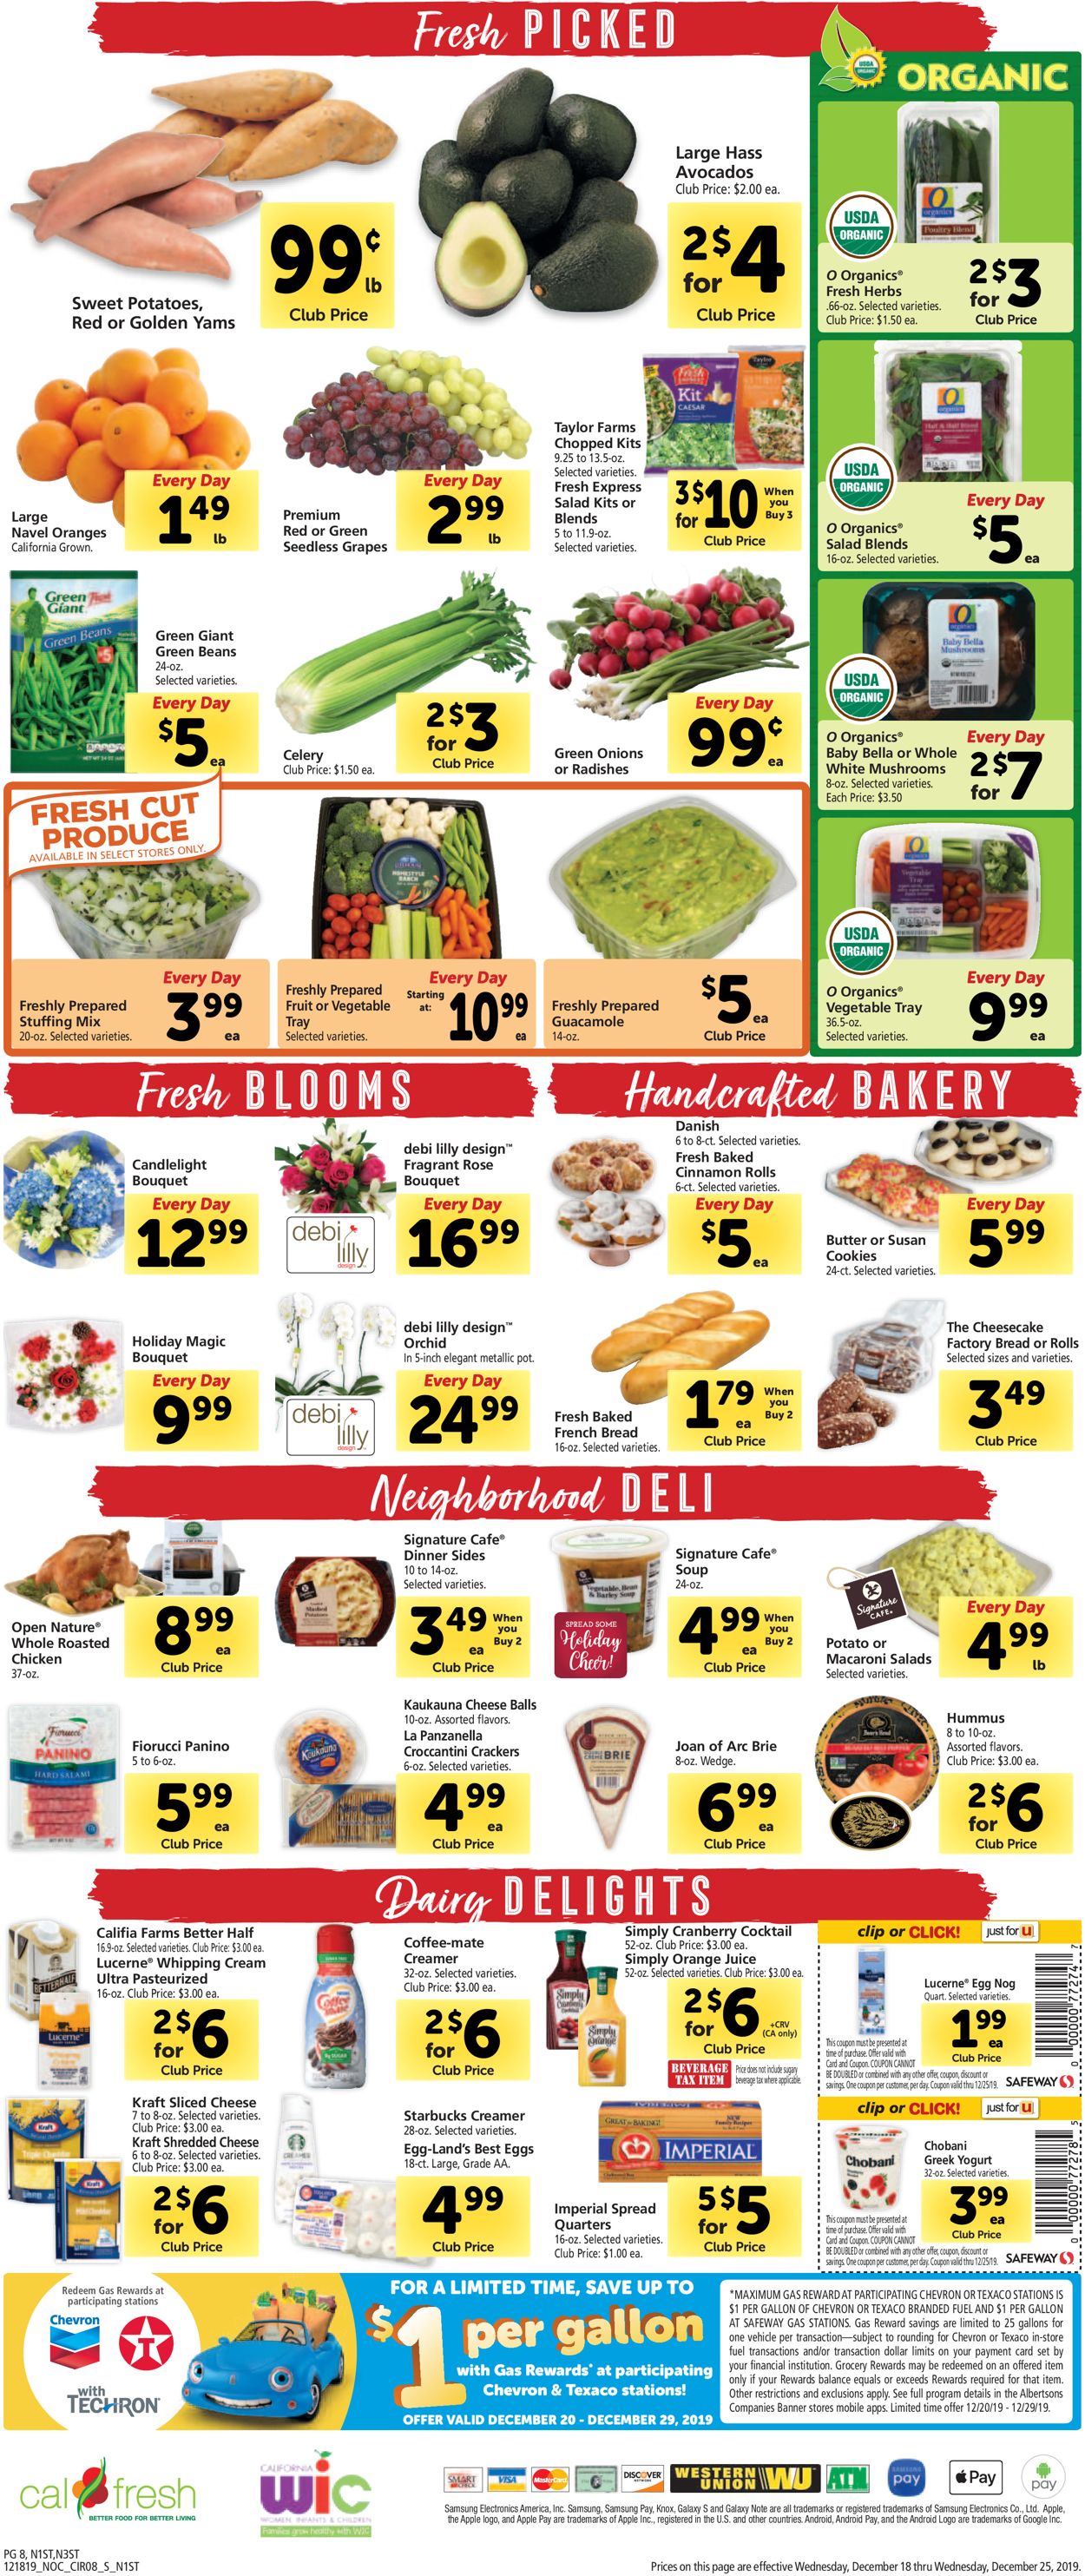 Safeway - Holiday Ad 2019 Current weekly ad 12/18 - 12/25/2019 [8 ...